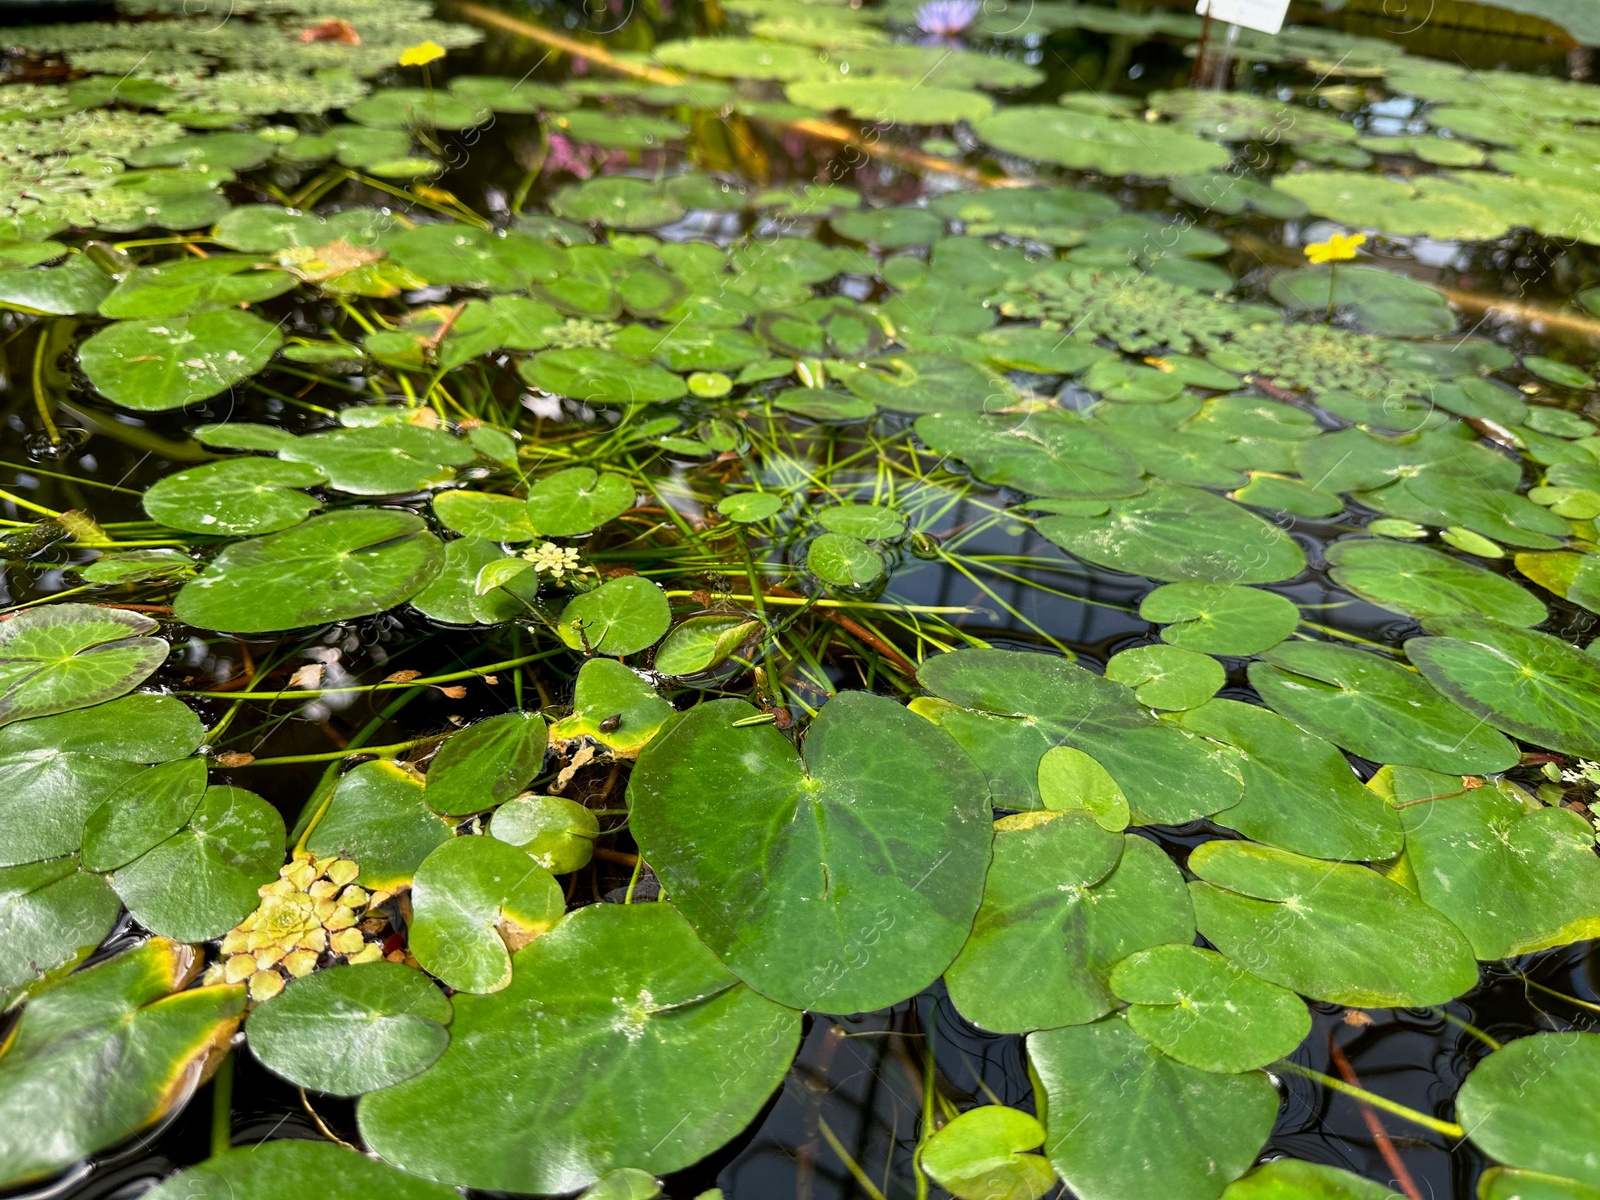 Photo of Pond with water lilies and other plants in botanical garden